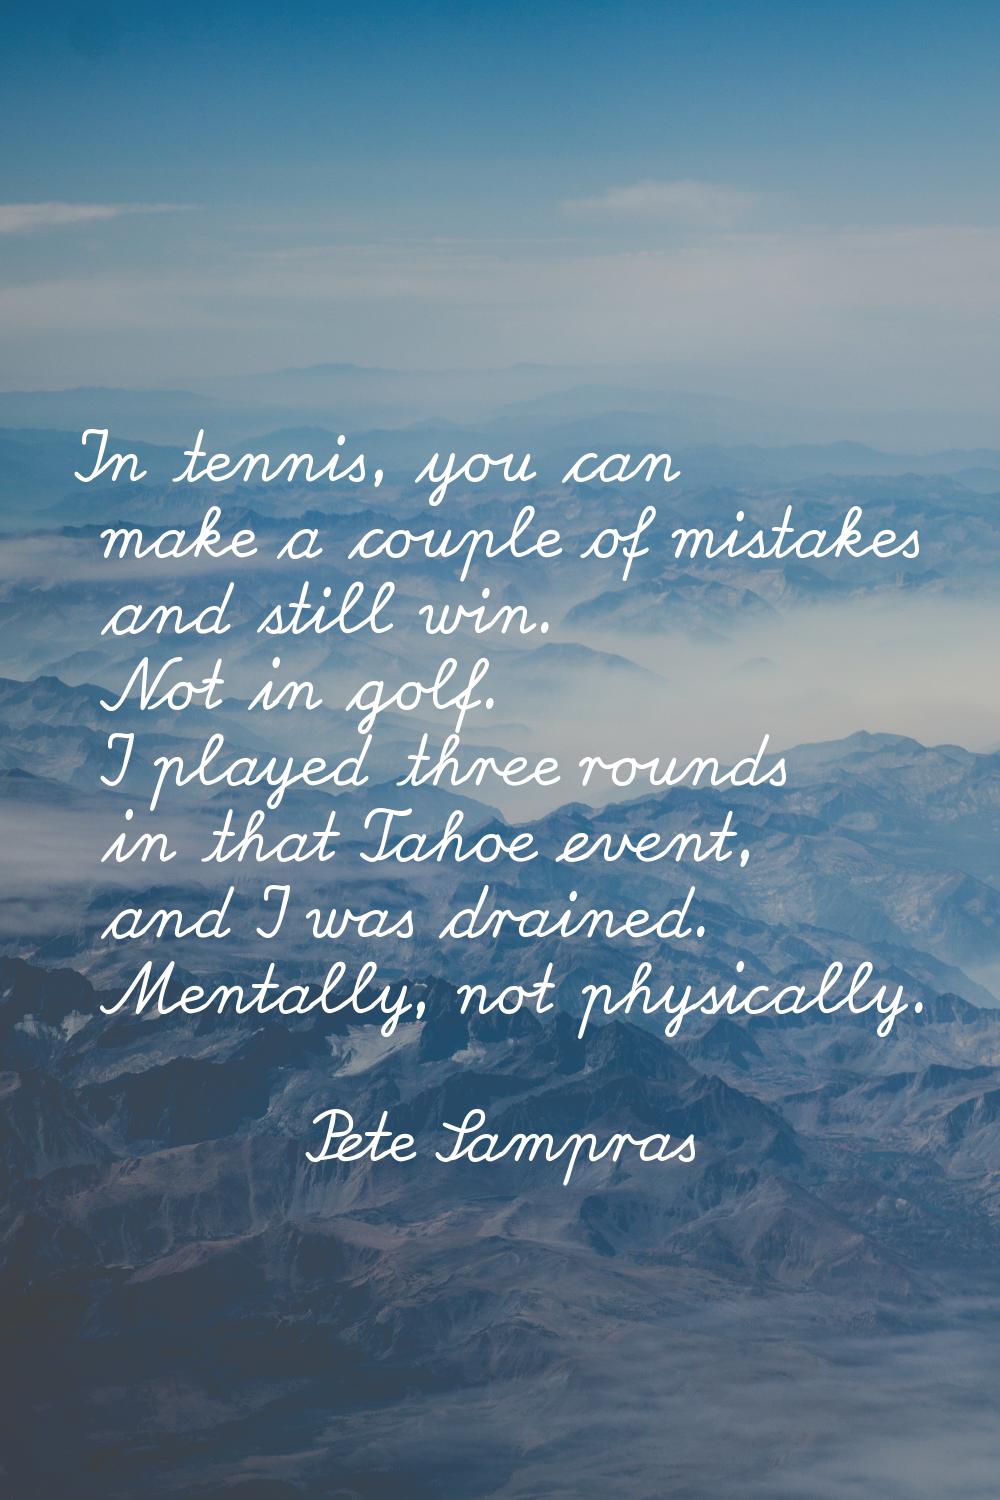 In tennis, you can make a couple of mistakes and still win. Not in golf. I played three rounds in t